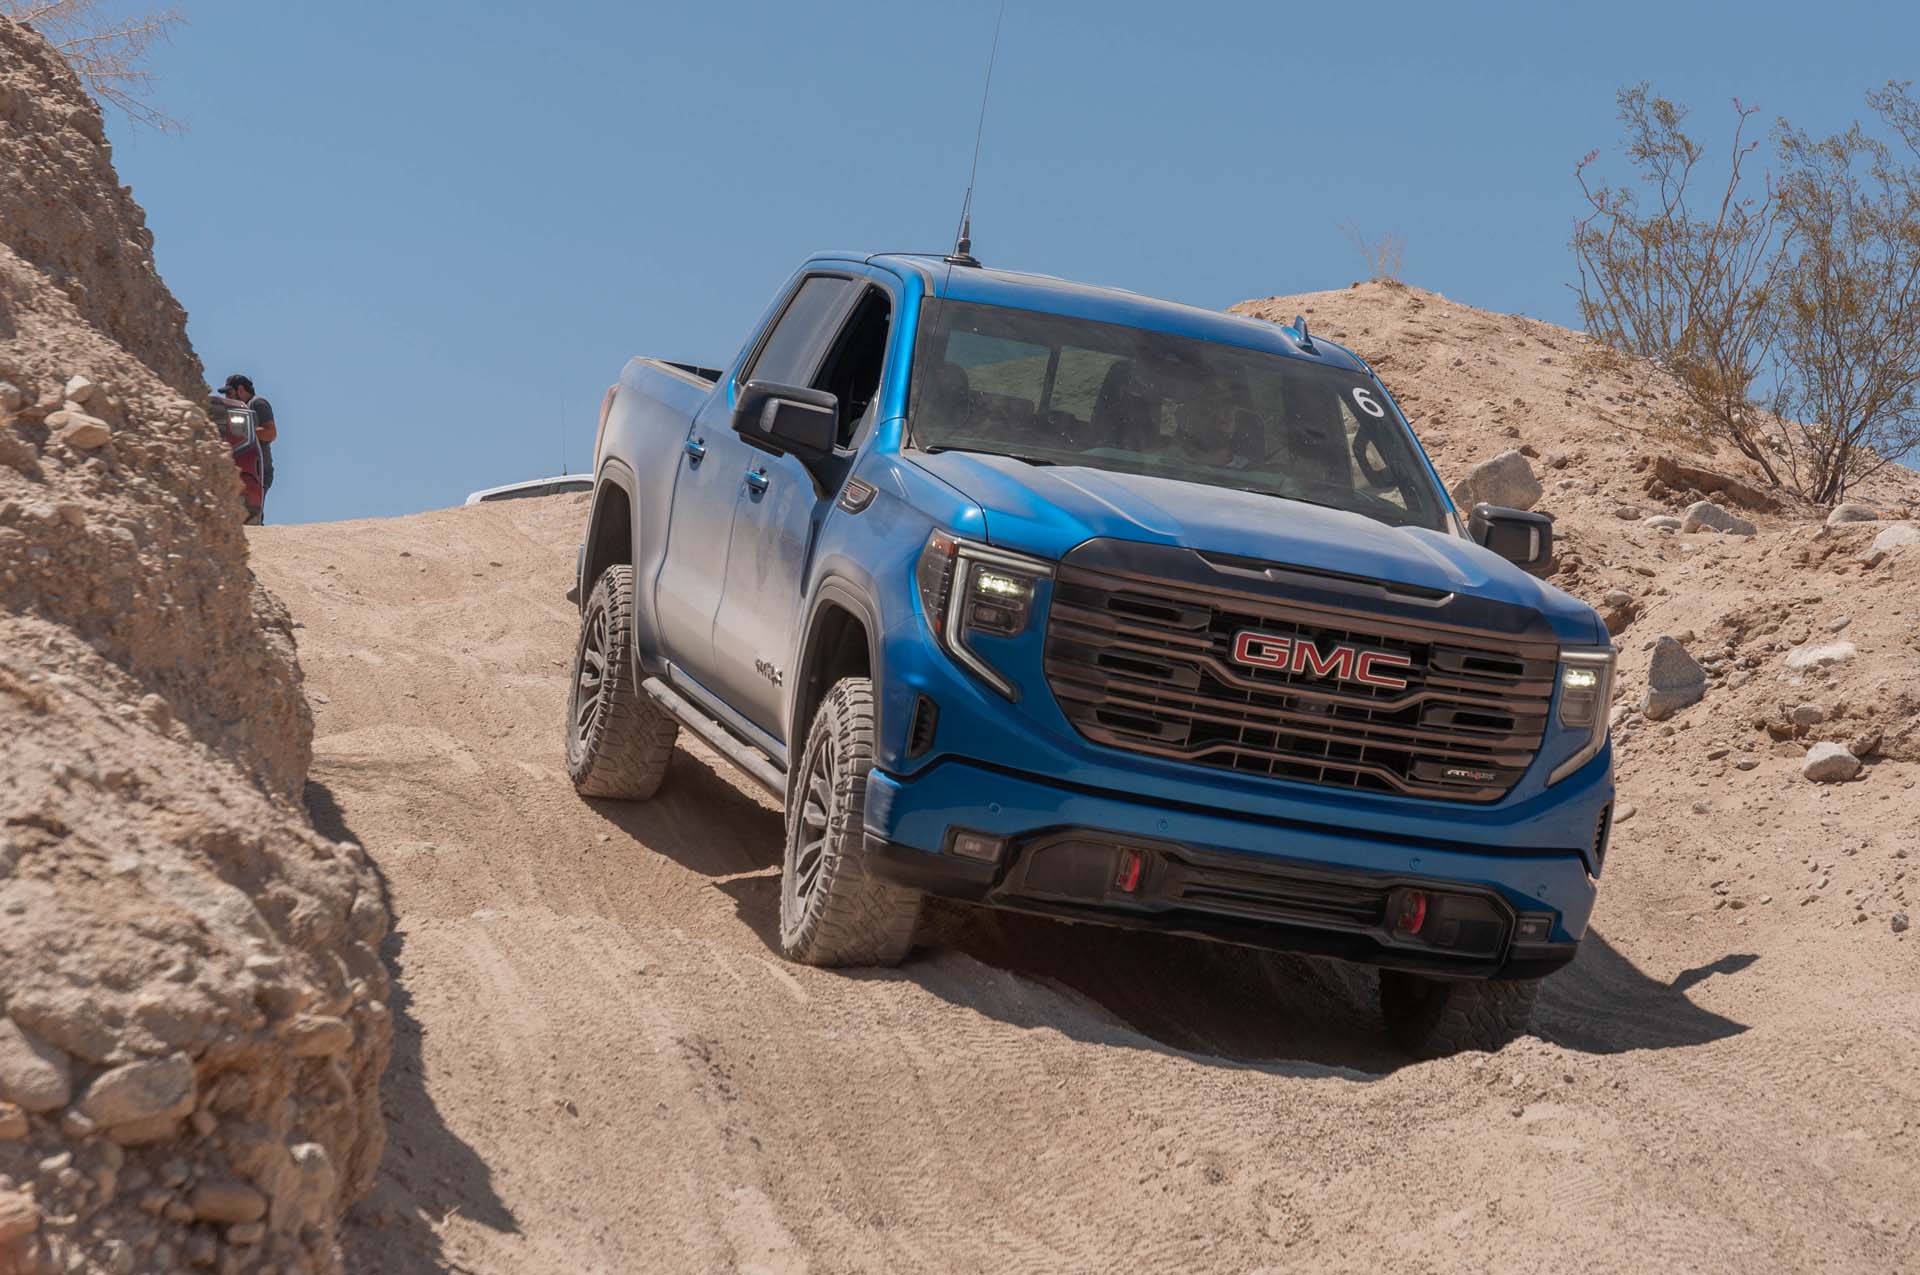 Review: 2022 GMC Sierra 1500 AT4X brings more luxury but less capability to the off-road game